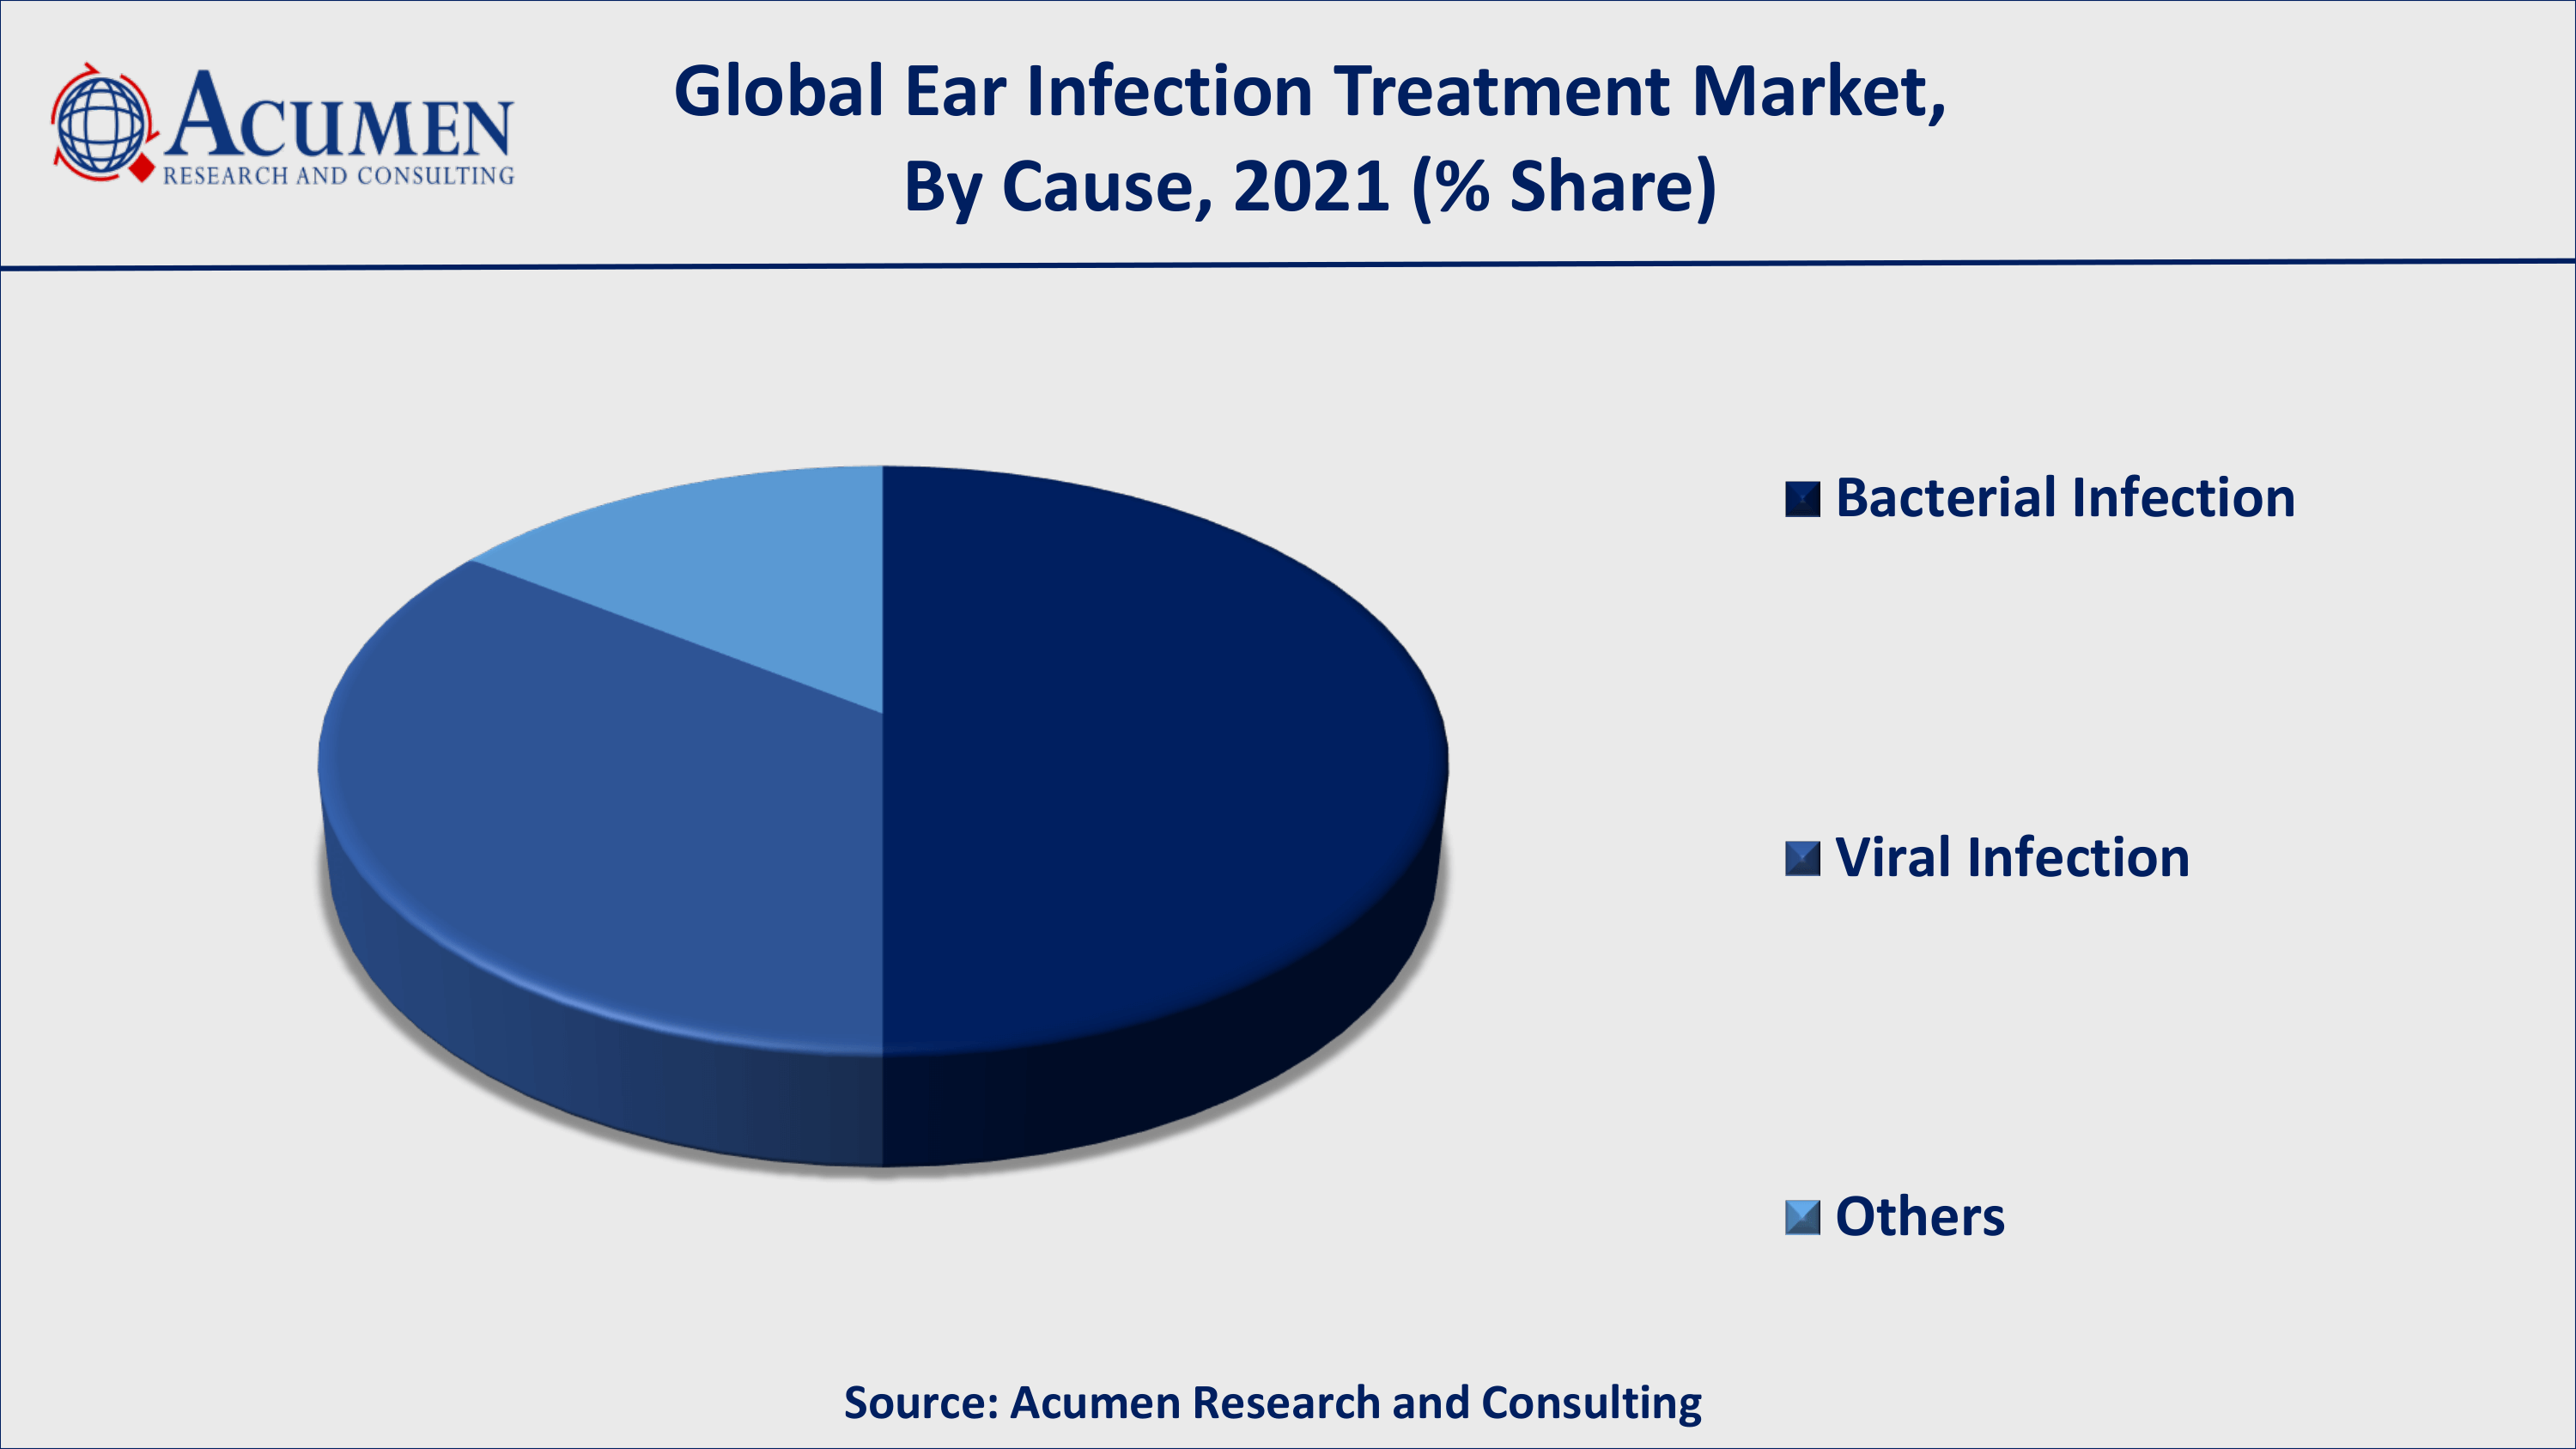 Based on cause, bacterial infection acquired over 50% of the overall market share in 2021